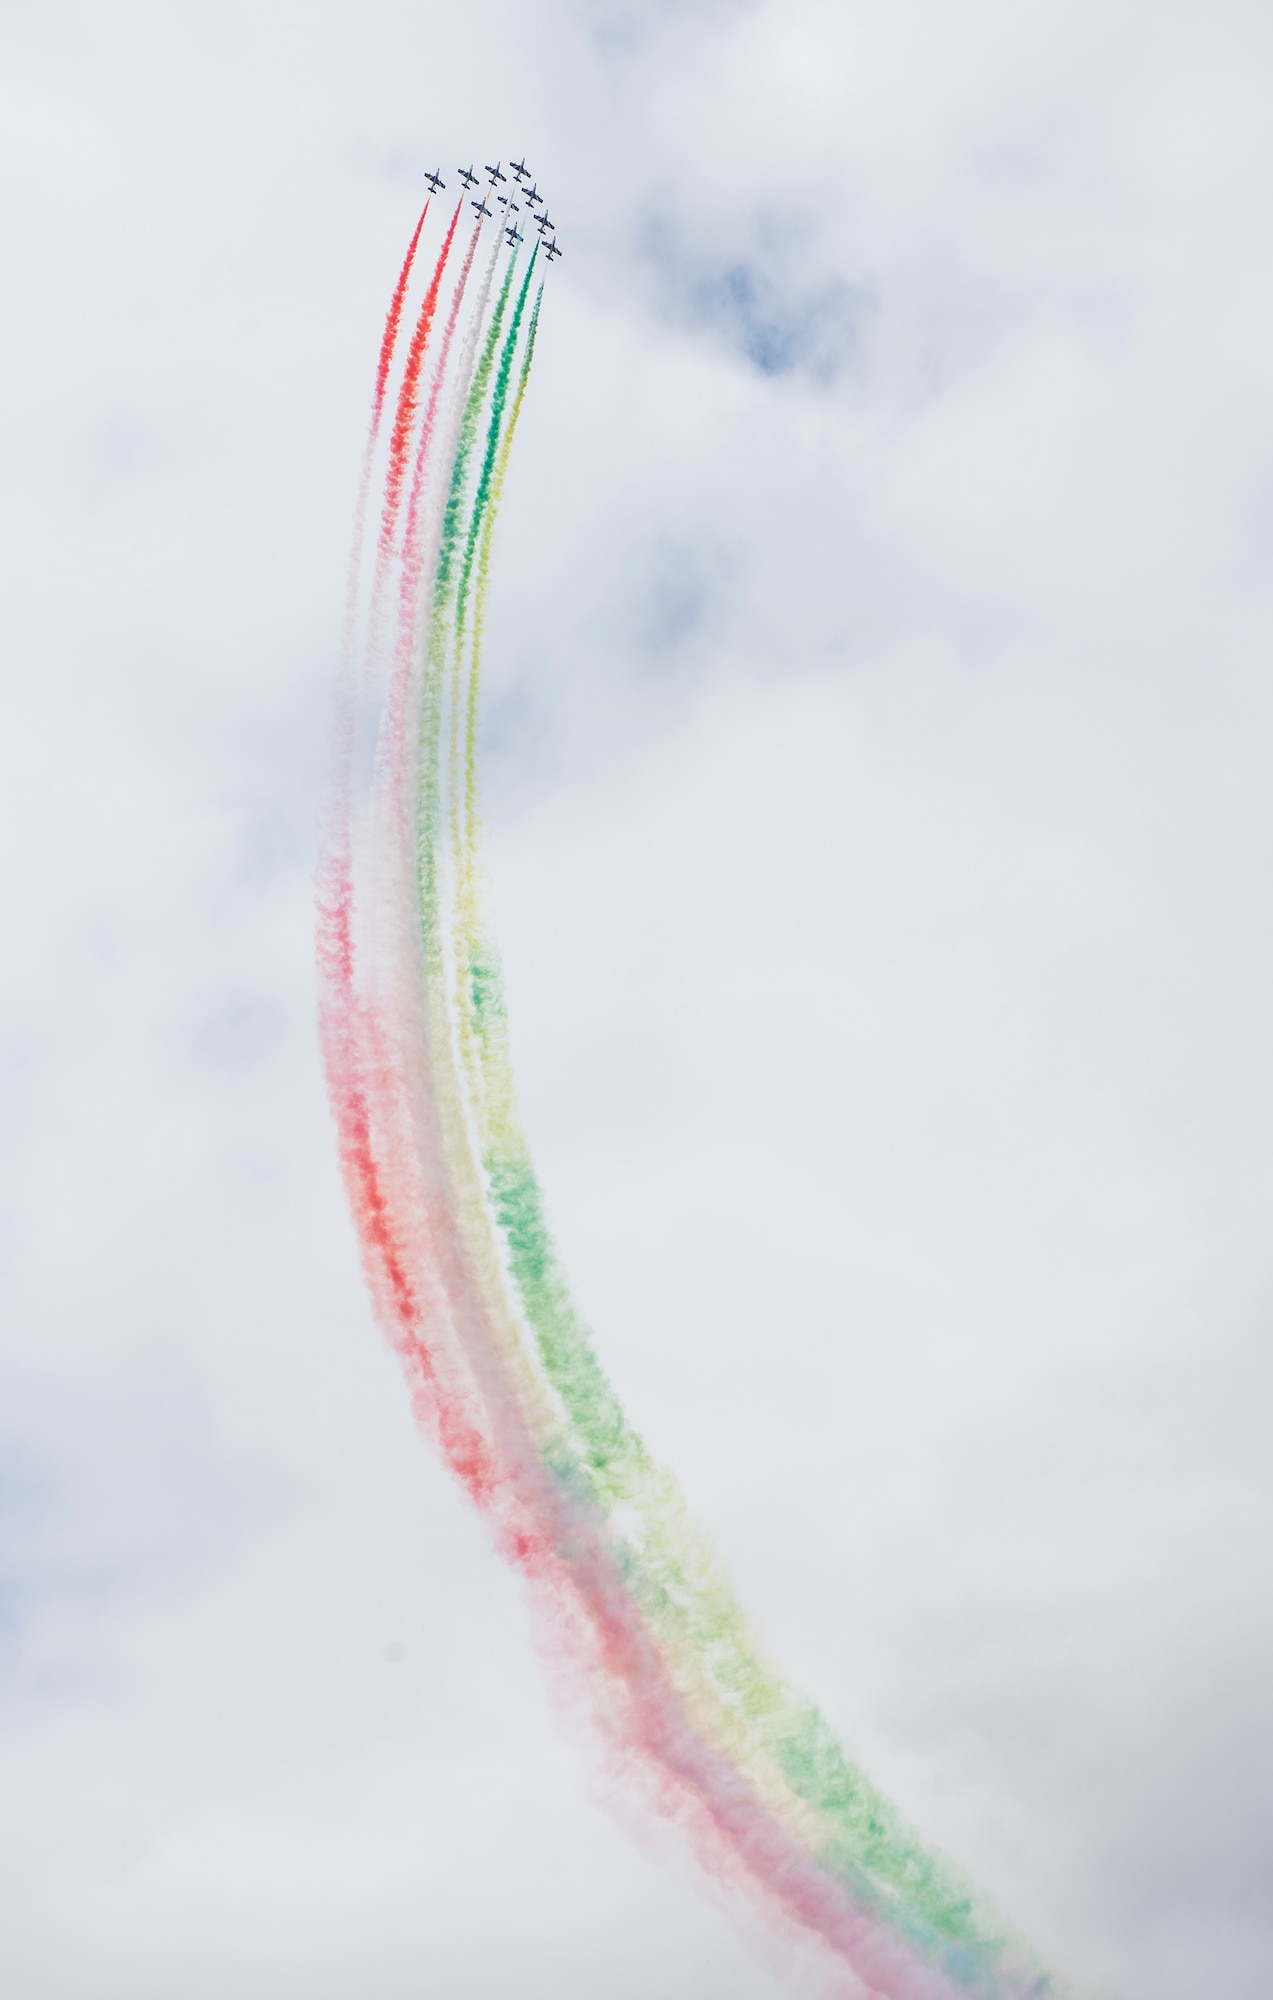 Several members of the Italian Air Force’s Frecce Tricolori aerobatic team conduct aerial maneuvers during the 2019 Royal International Air Tattoo at RAF Fairford, England, July 20, 2019. This year, RIAT commemorated the 70th anniversary of NATO and highlighted the United States' enduring commitment to its European allies. (U.S. Air Force photo by Airman 1st Class Jennifer Zima)